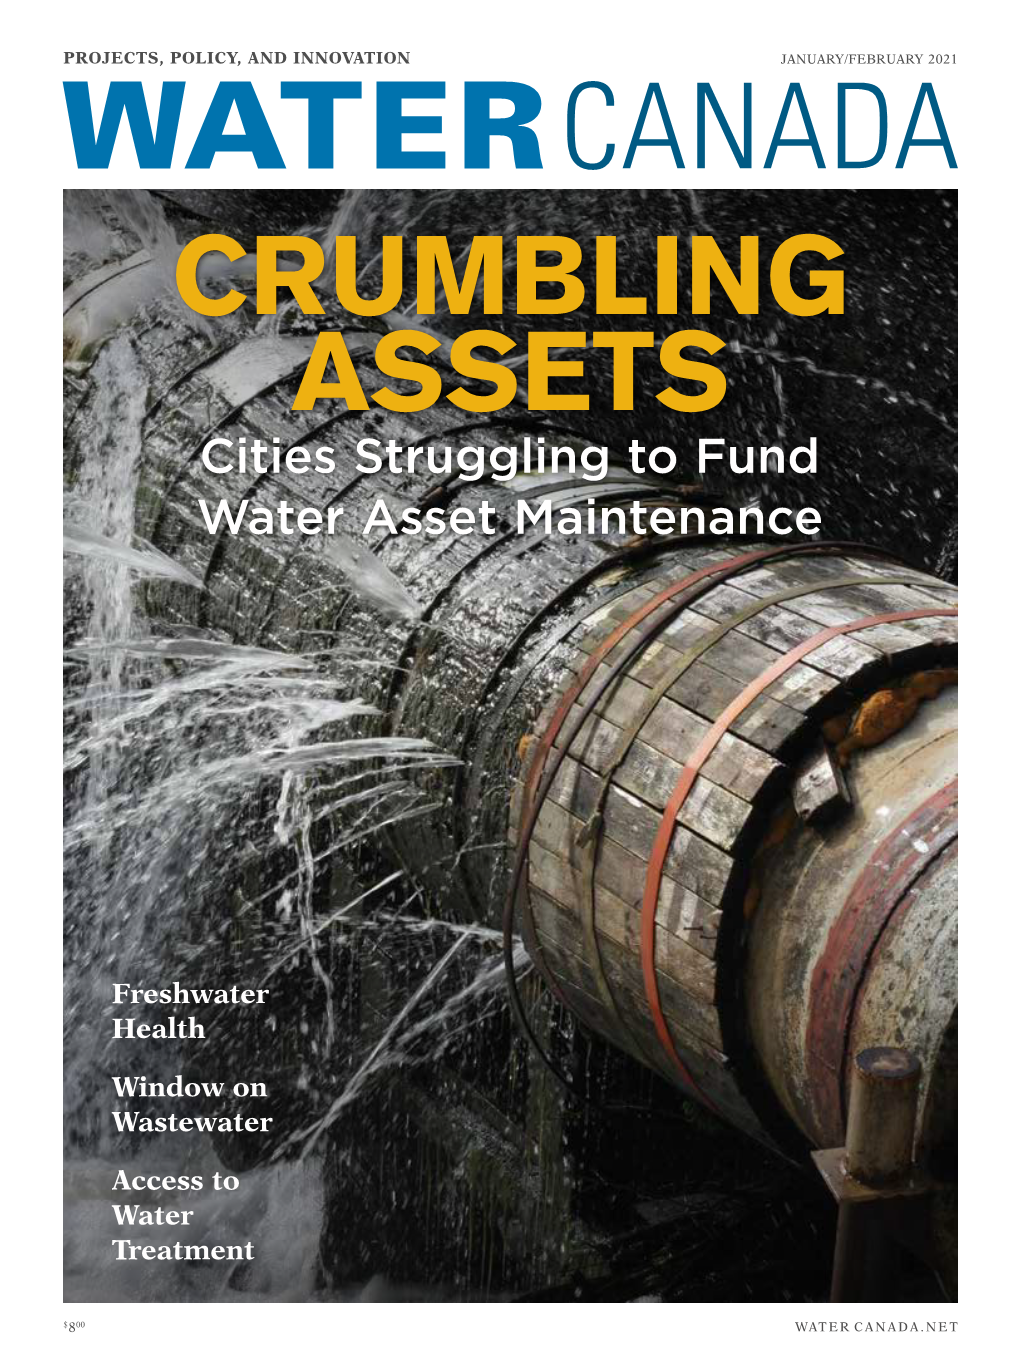 CRUMBLING ASSETS Cities Struggling to Fund Water Asset Maintenance